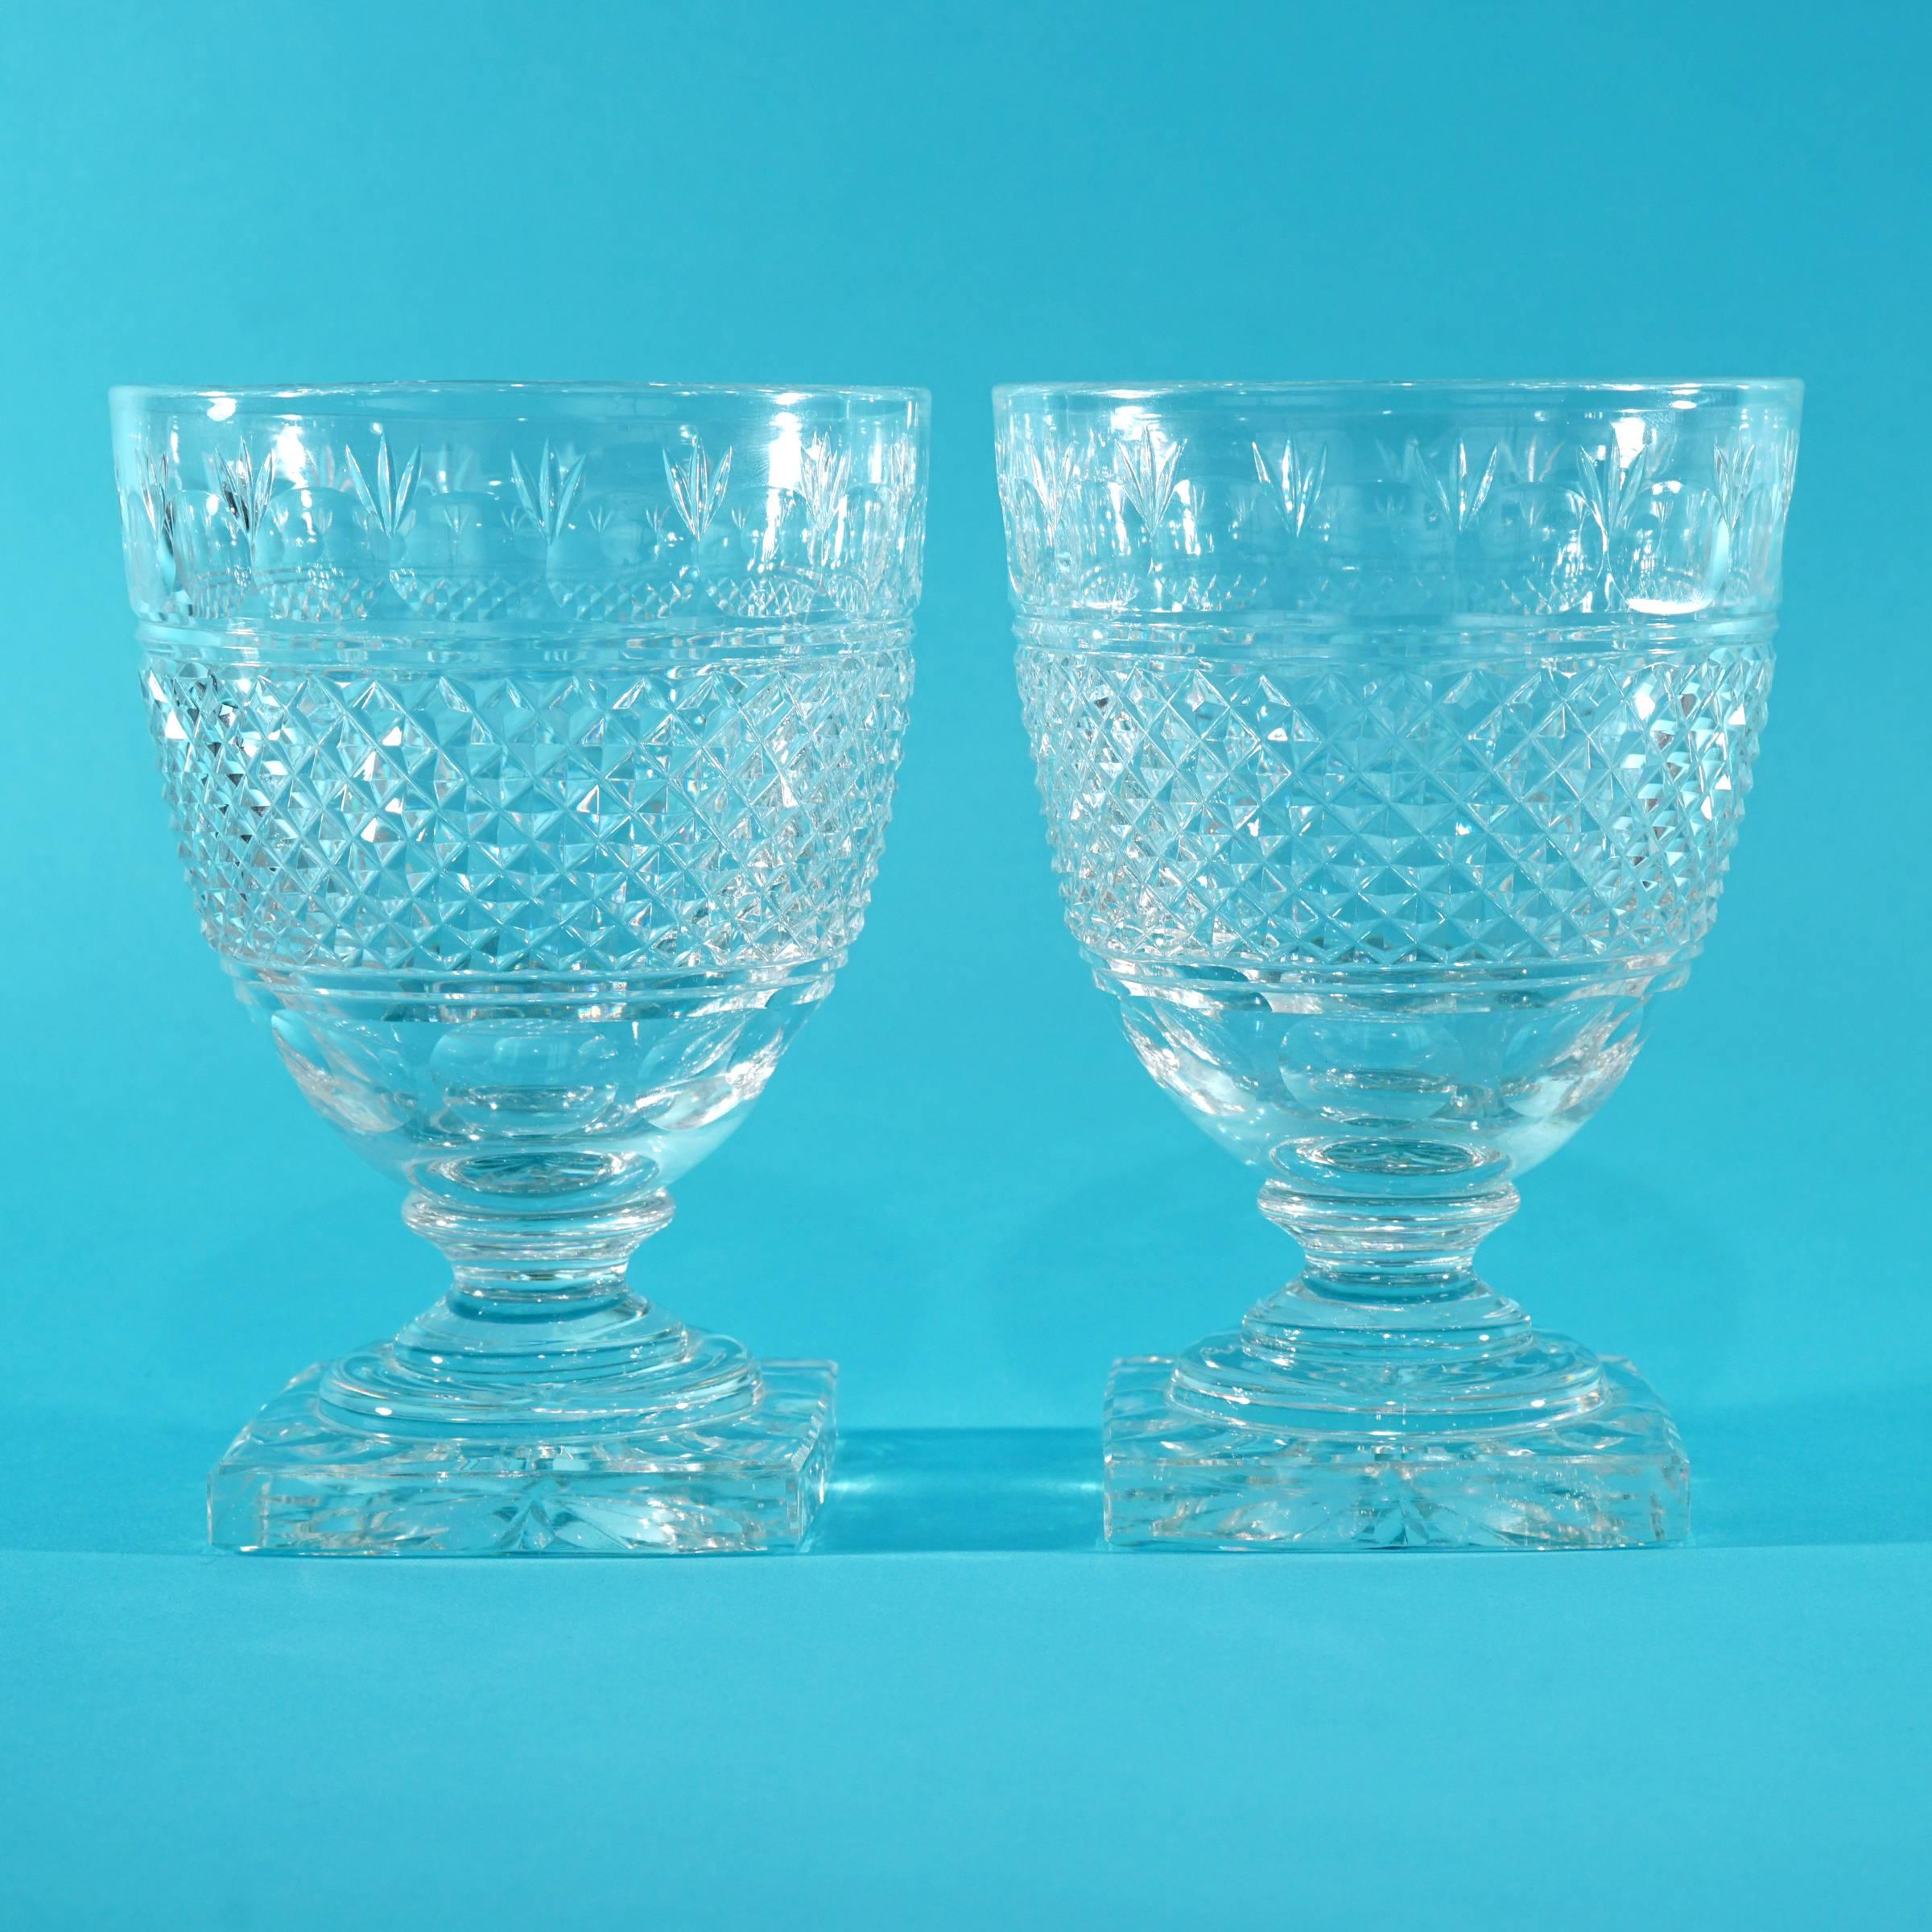 10 Heavy Cut Glass Water Goblets c1890s England 2